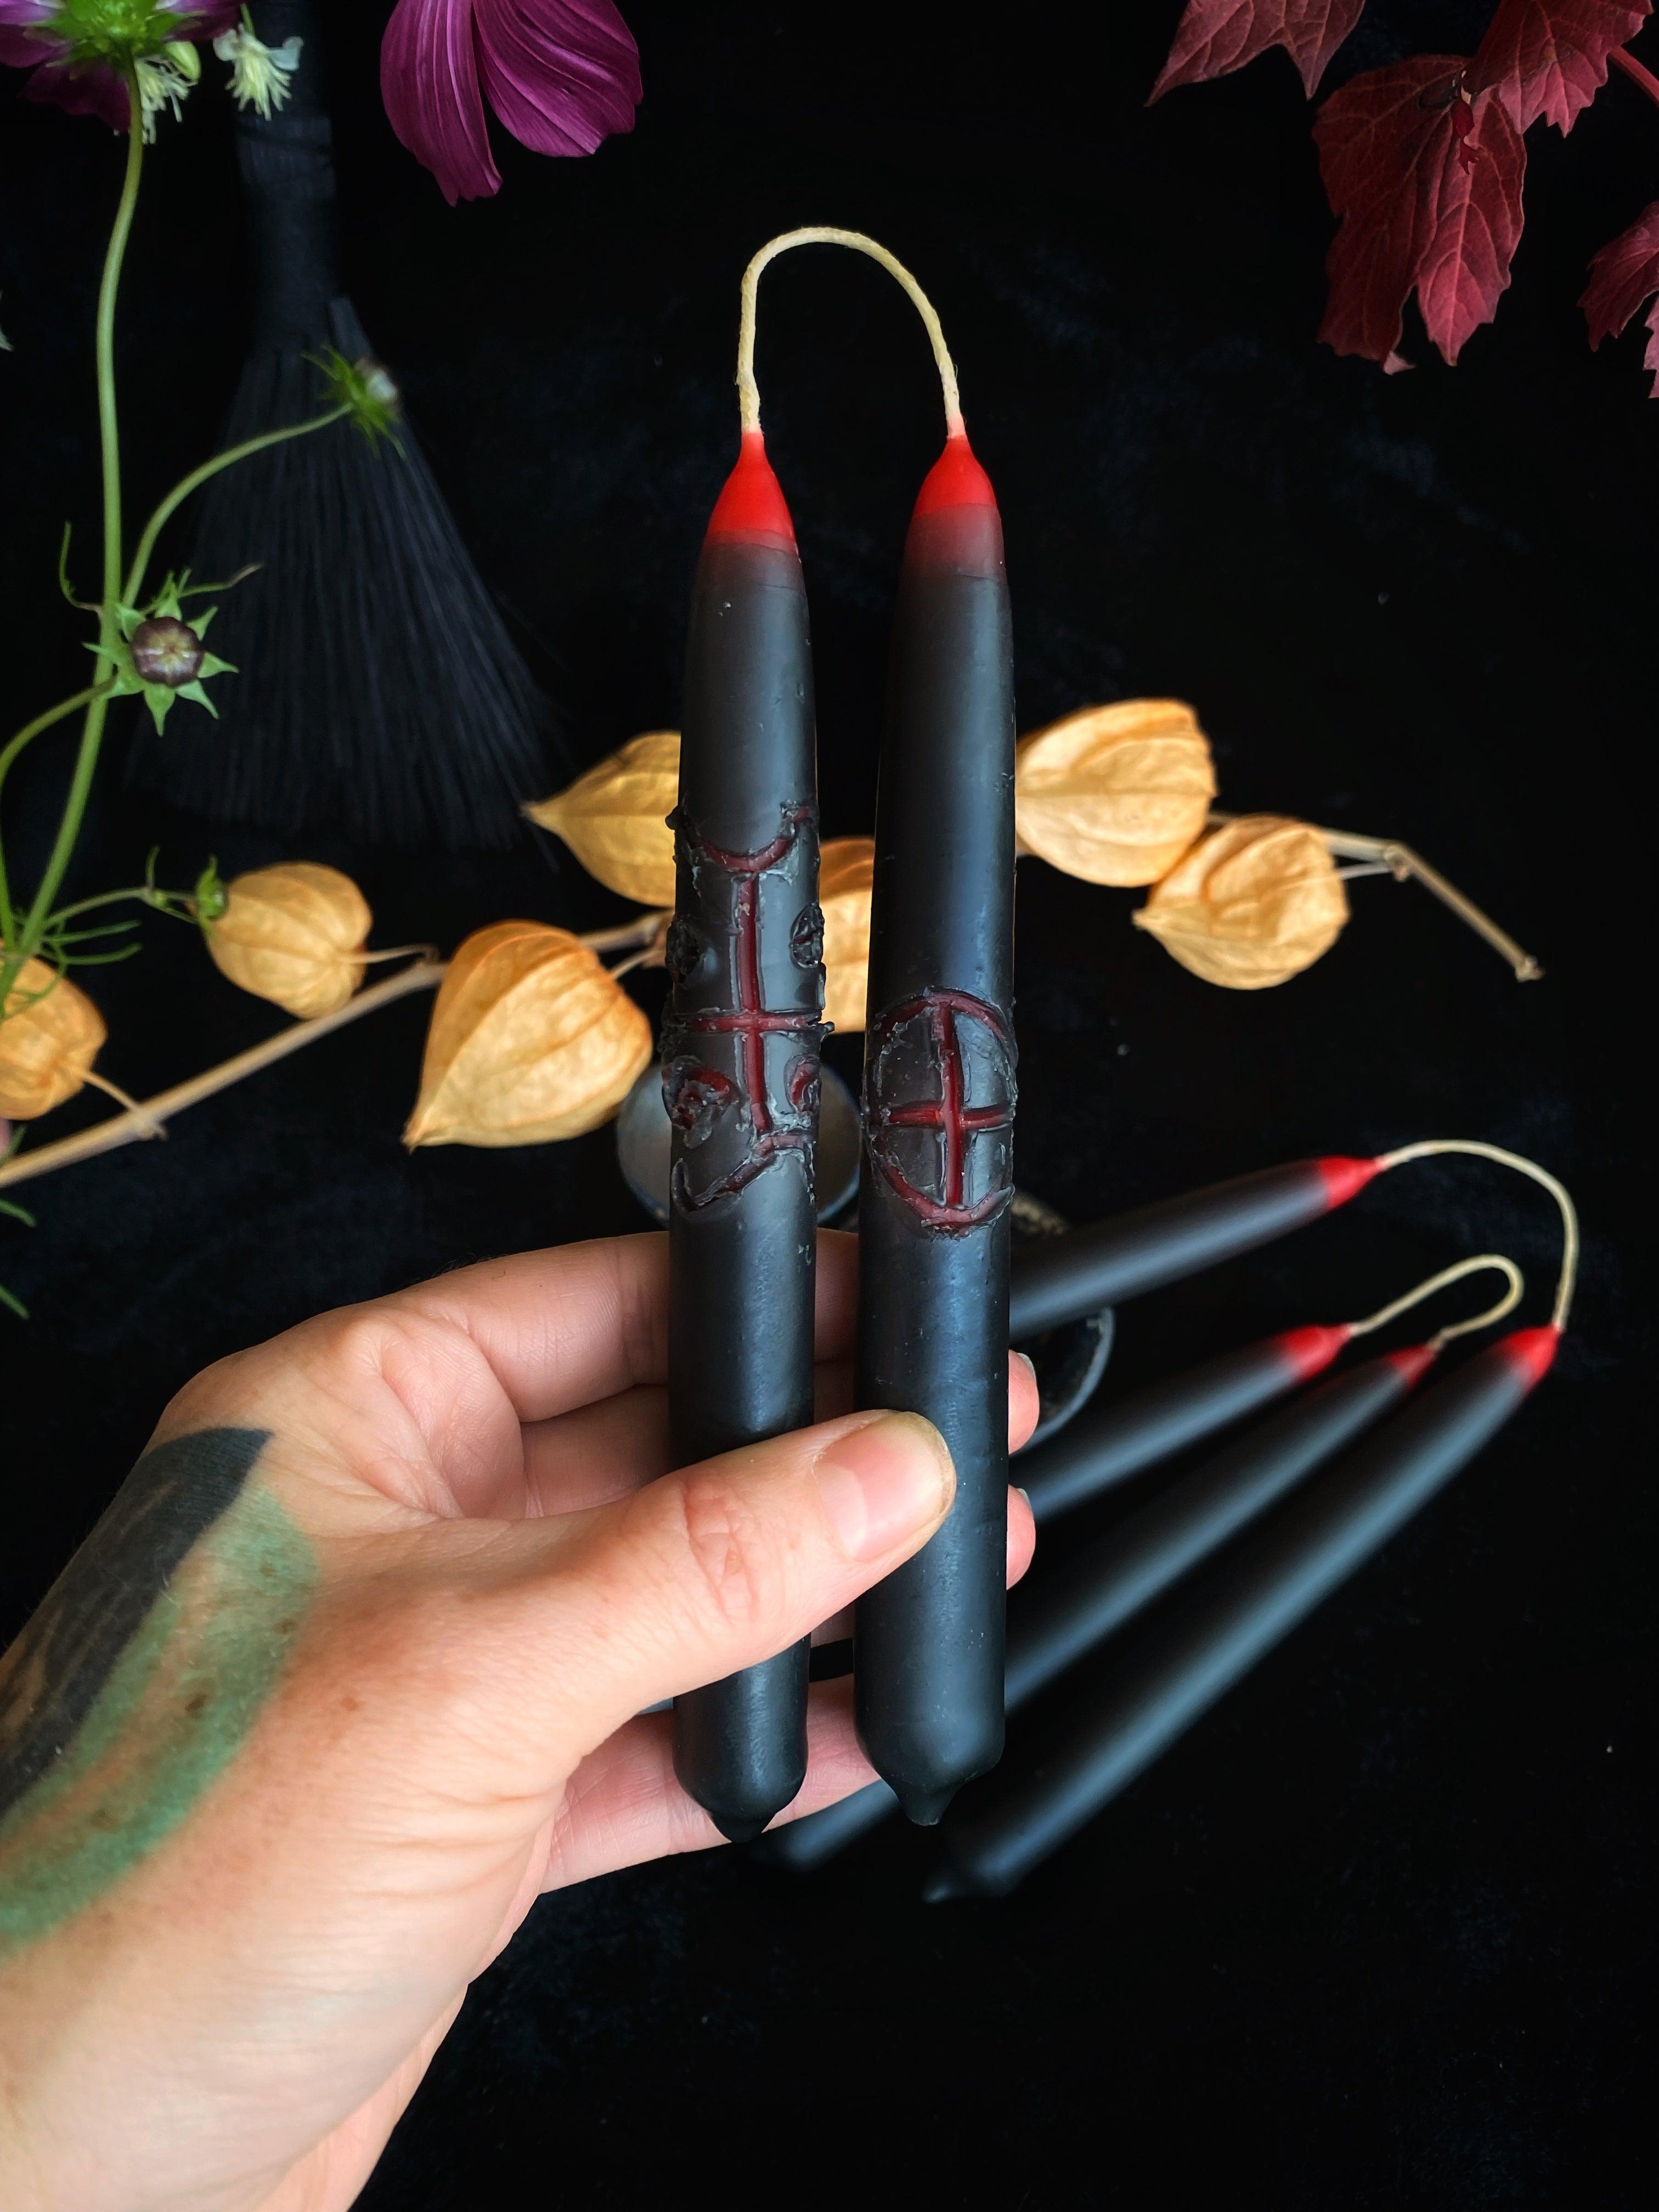 Specialty Witches Wands - Hand Dipped, Taper Beeswax Spell (6" Chime) Candles - Keven Craft Rituals